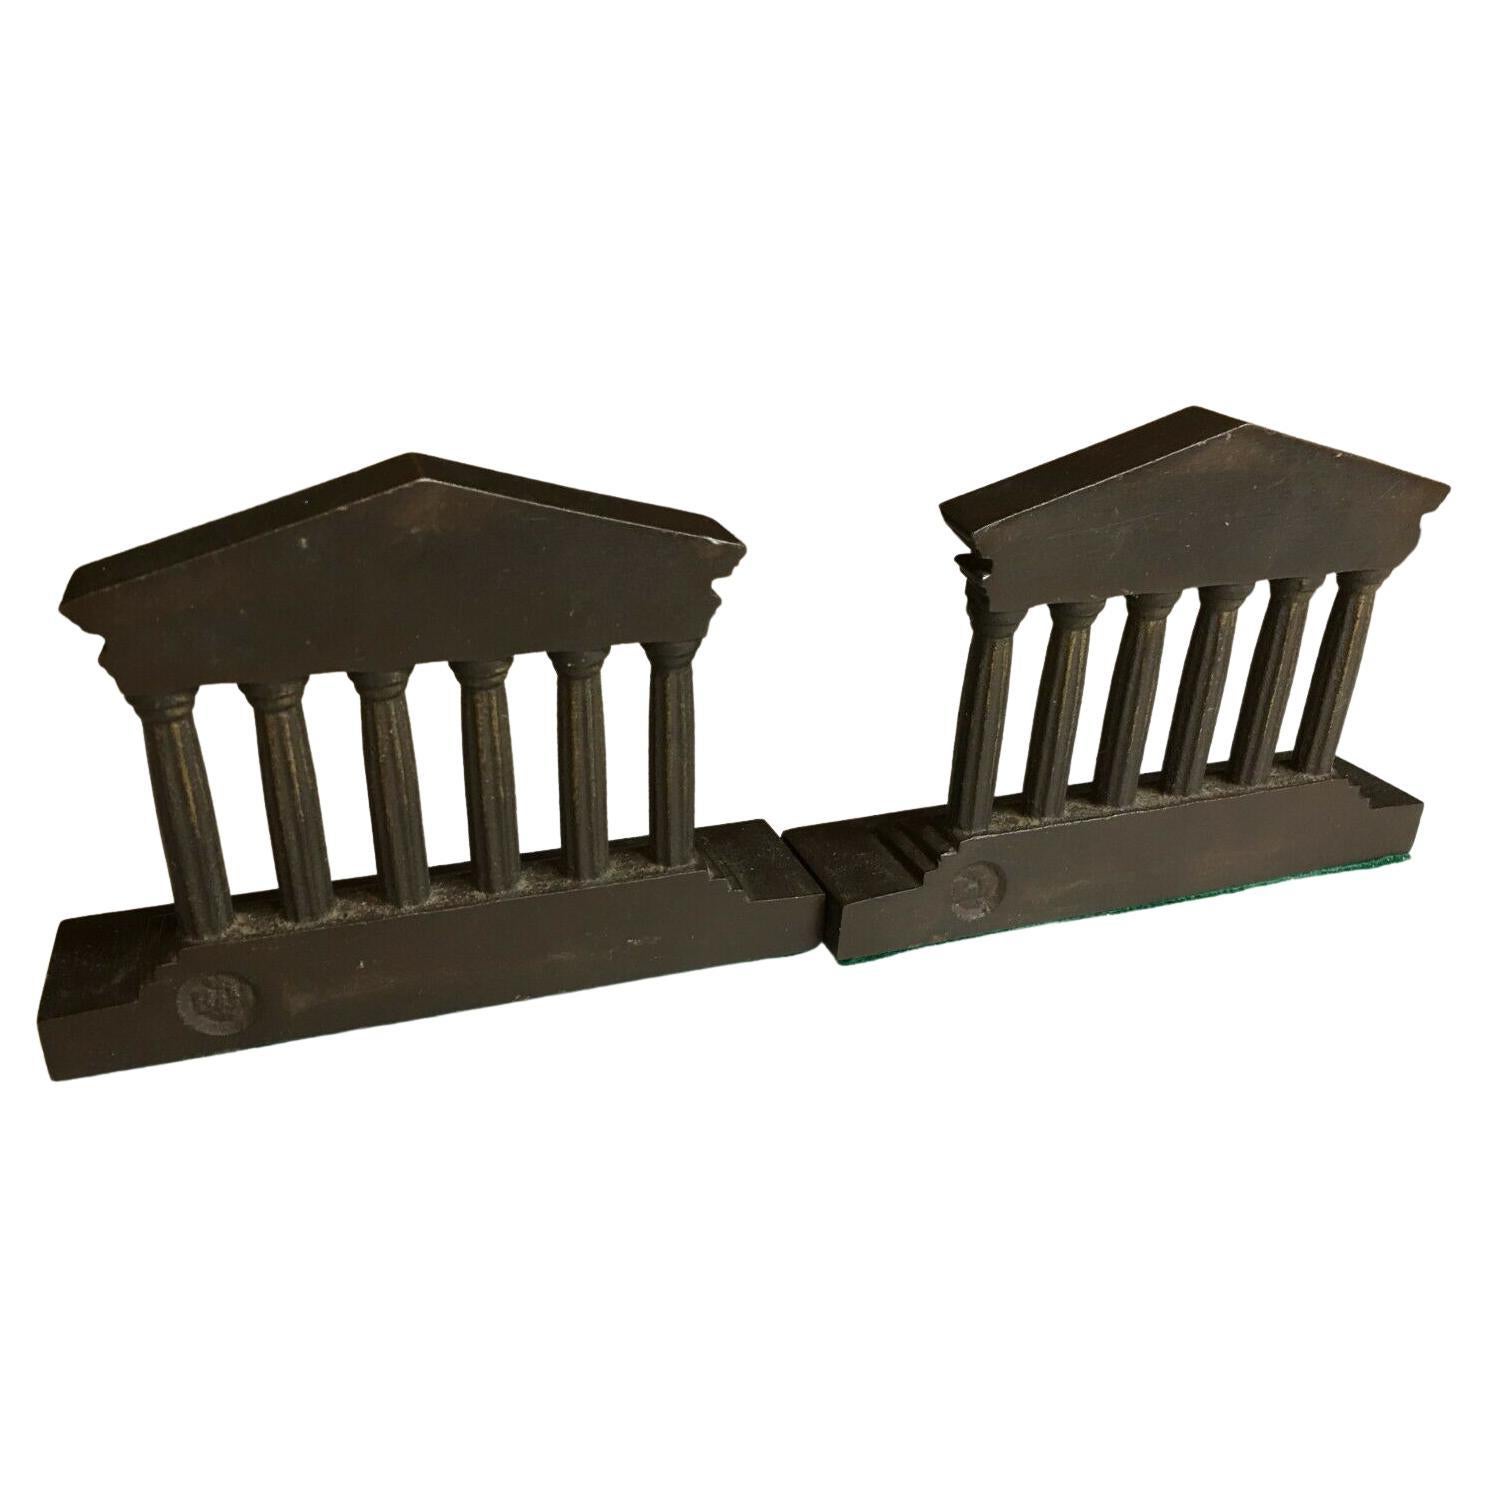 Other Bradley Hubbard B&H Gold/Gilded Bookends Federal Neoclassical Building w/Columns For Sale